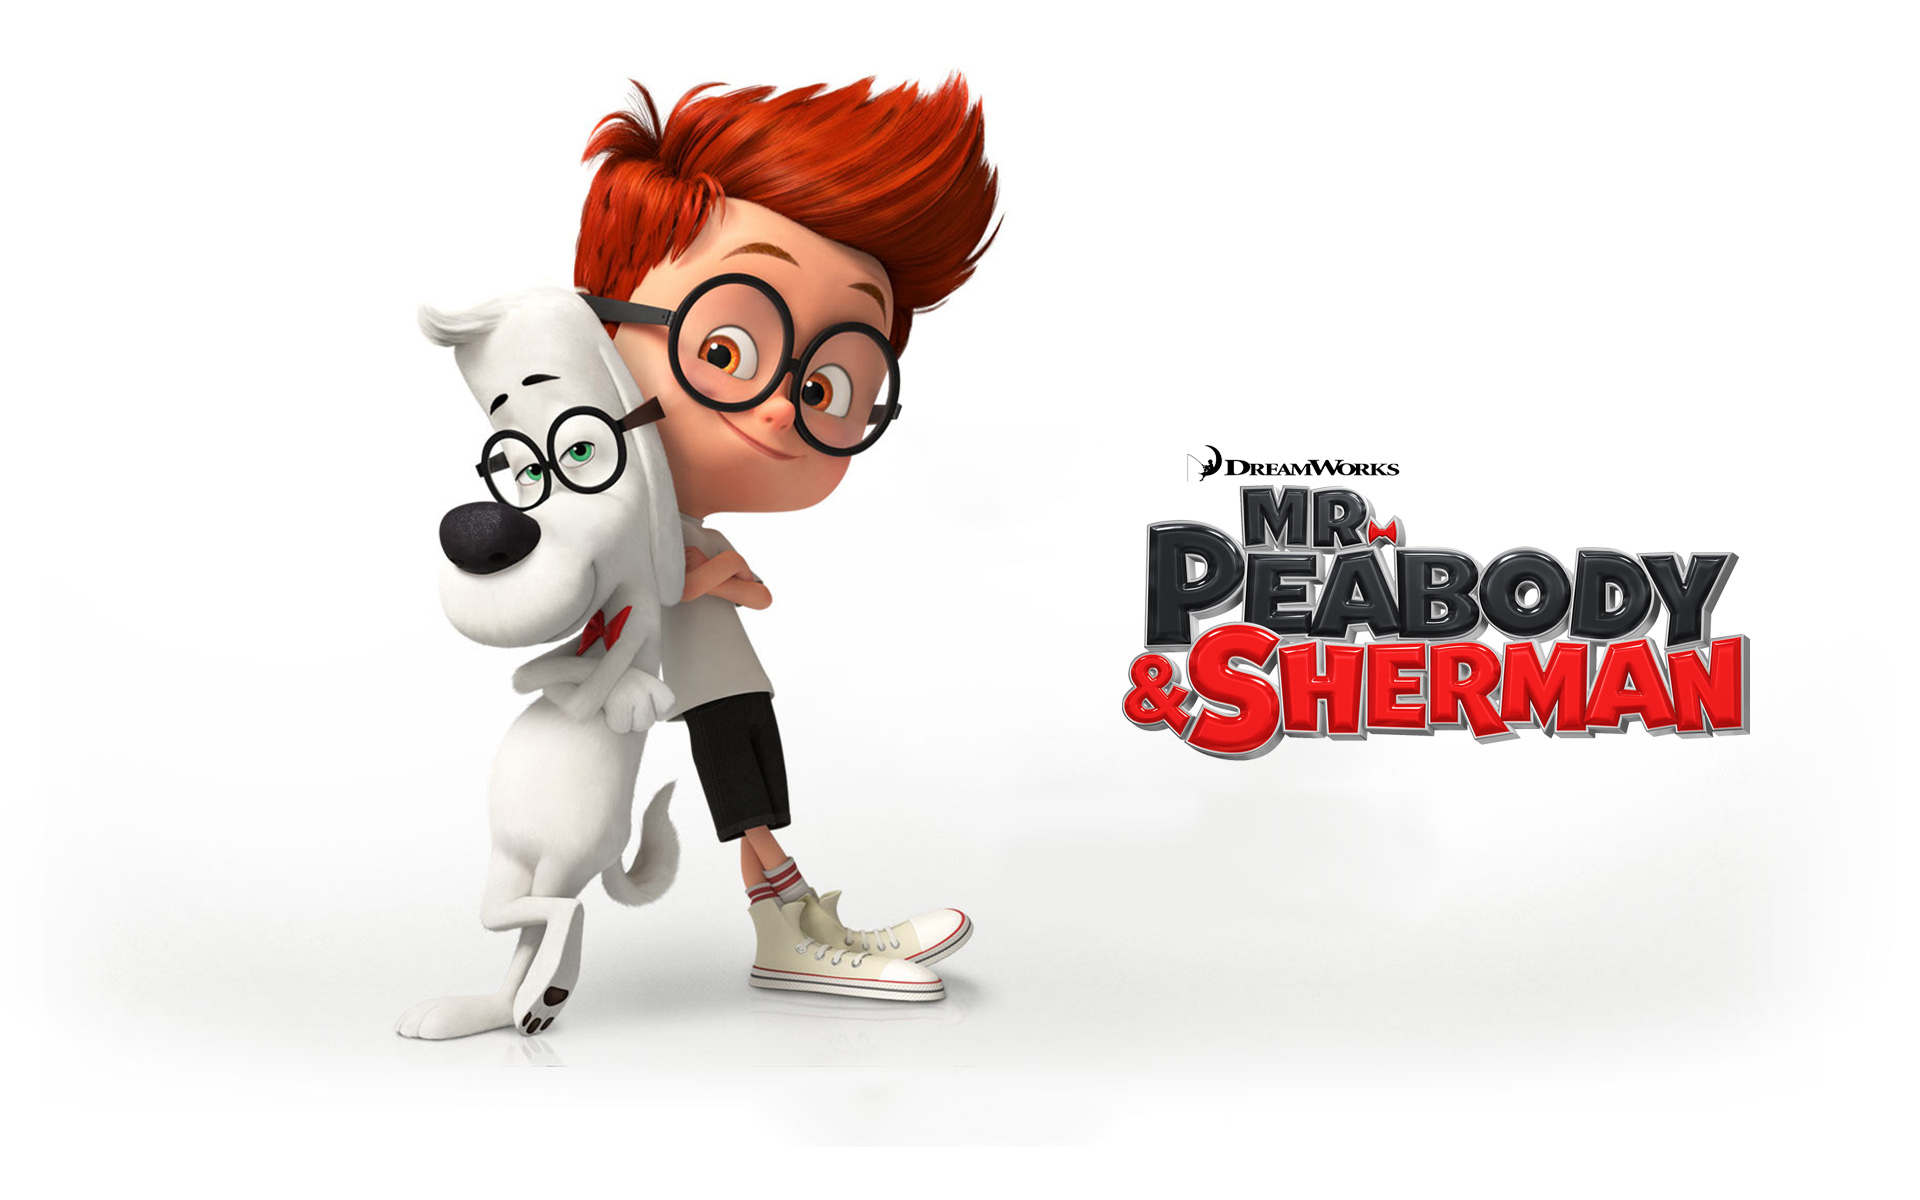 Images of Mr. Peabody & Sherman | 1920x1200